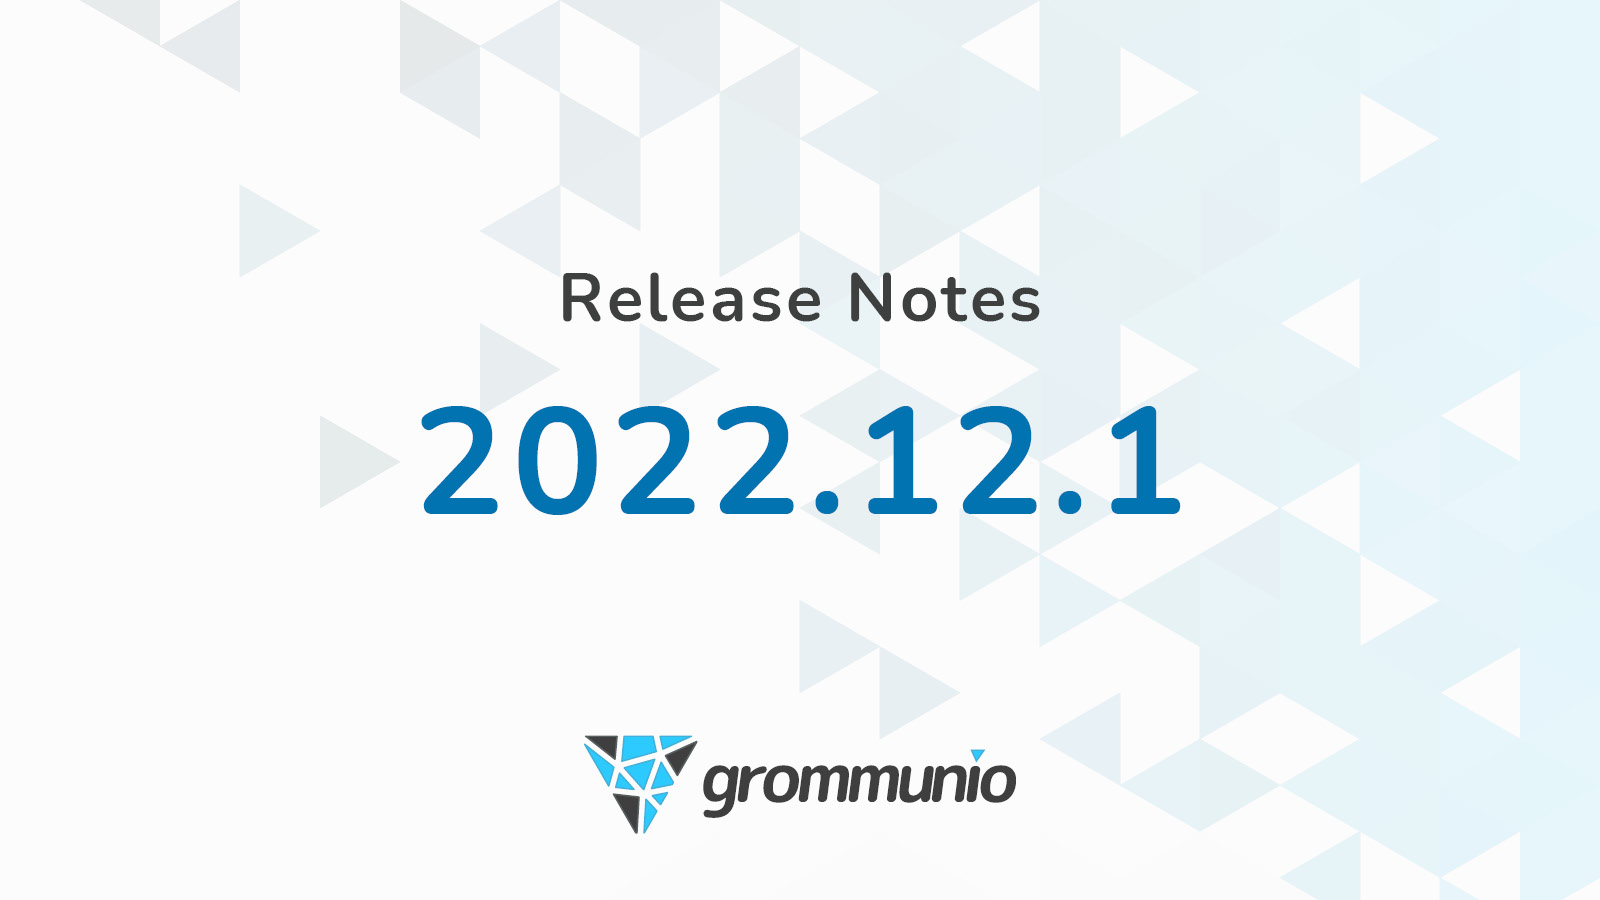 Release Notes 2022.12.1